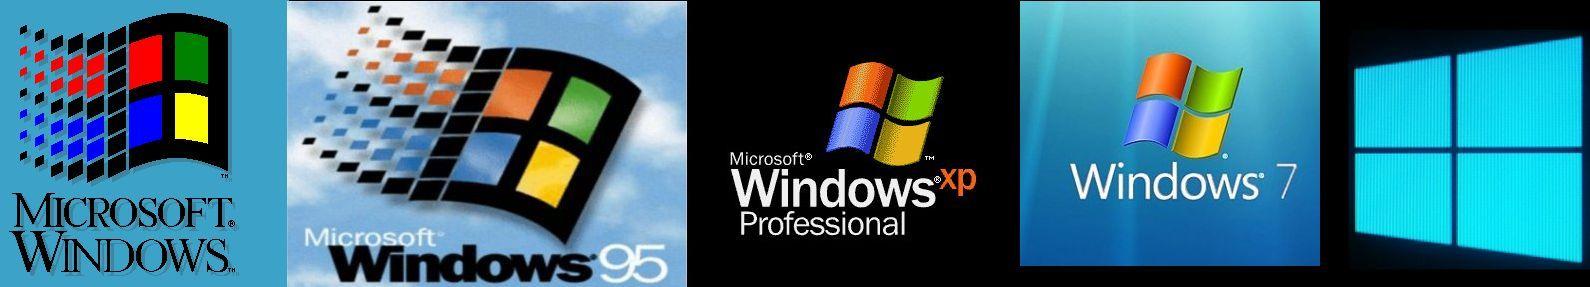 Windows Future Logo - Upgrading to Windows 10 could make future upgrades much smoother ...